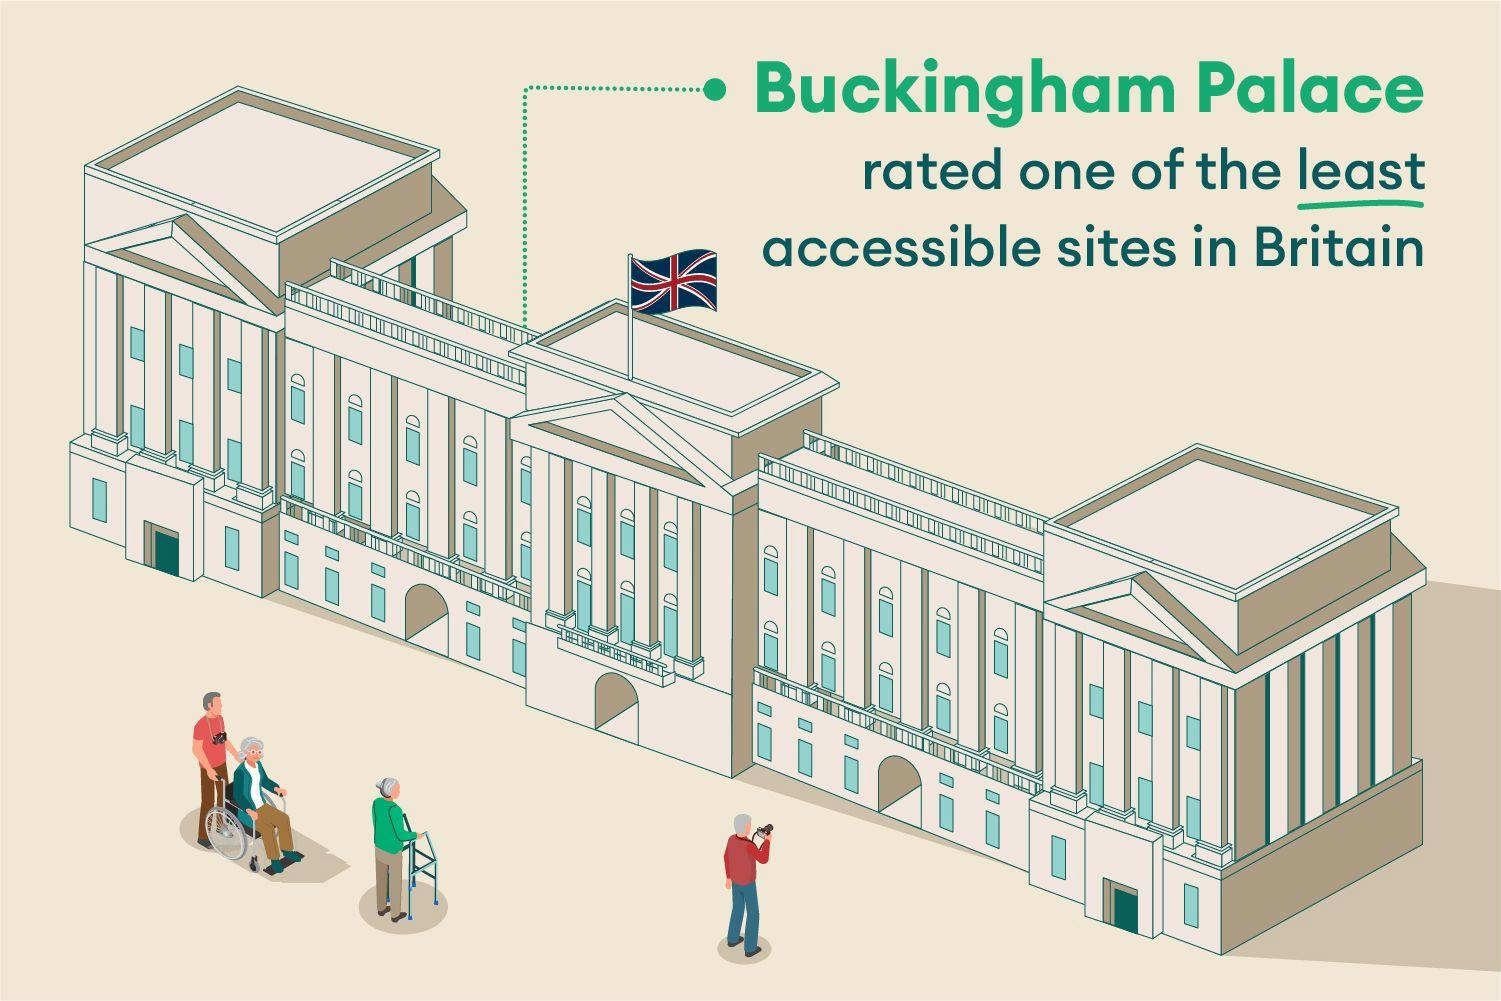 Buckingham Palace rated one of the least accessible sites in Britain